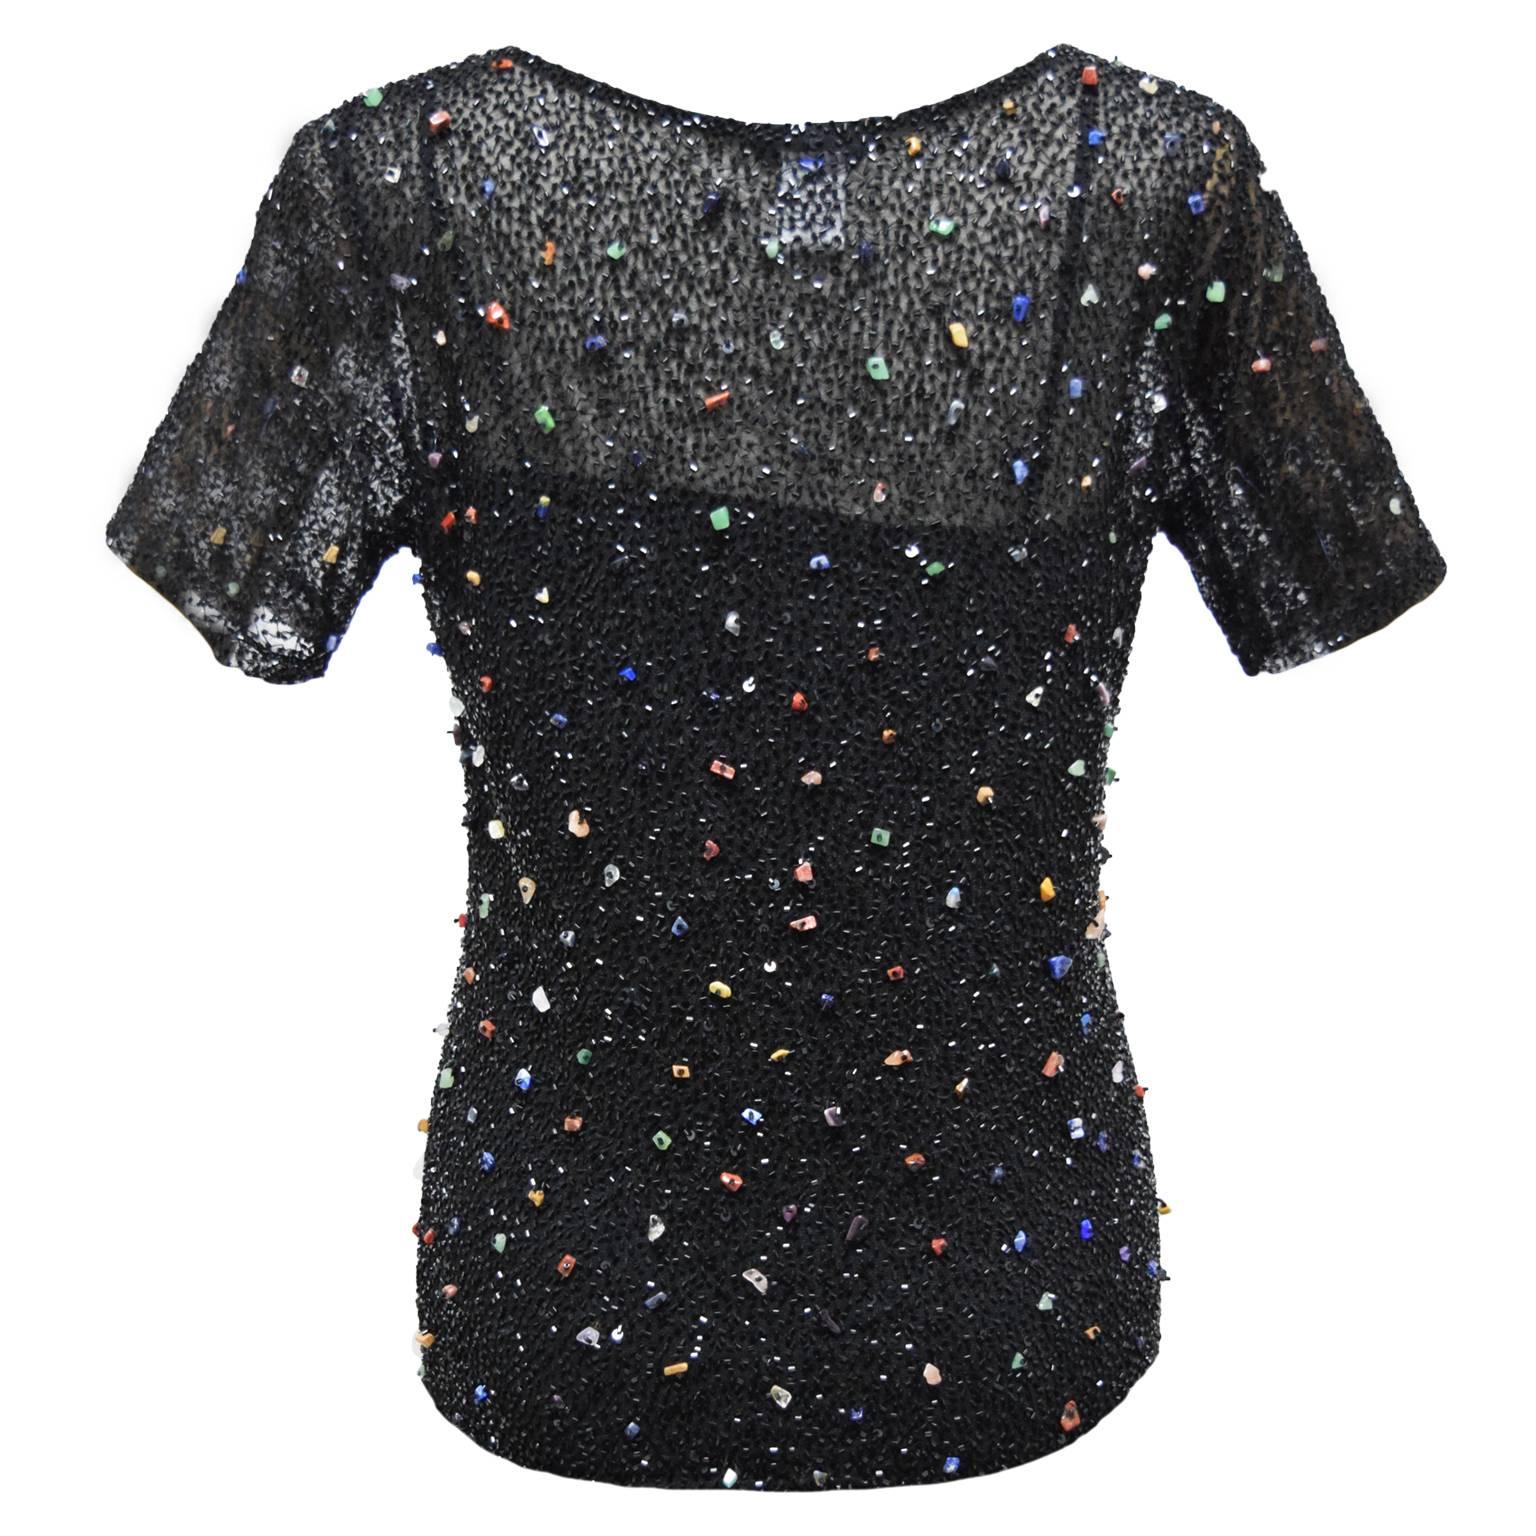 This Krizia blouse is a sheer silk shell with an overall multicolored glass and seed beading design.